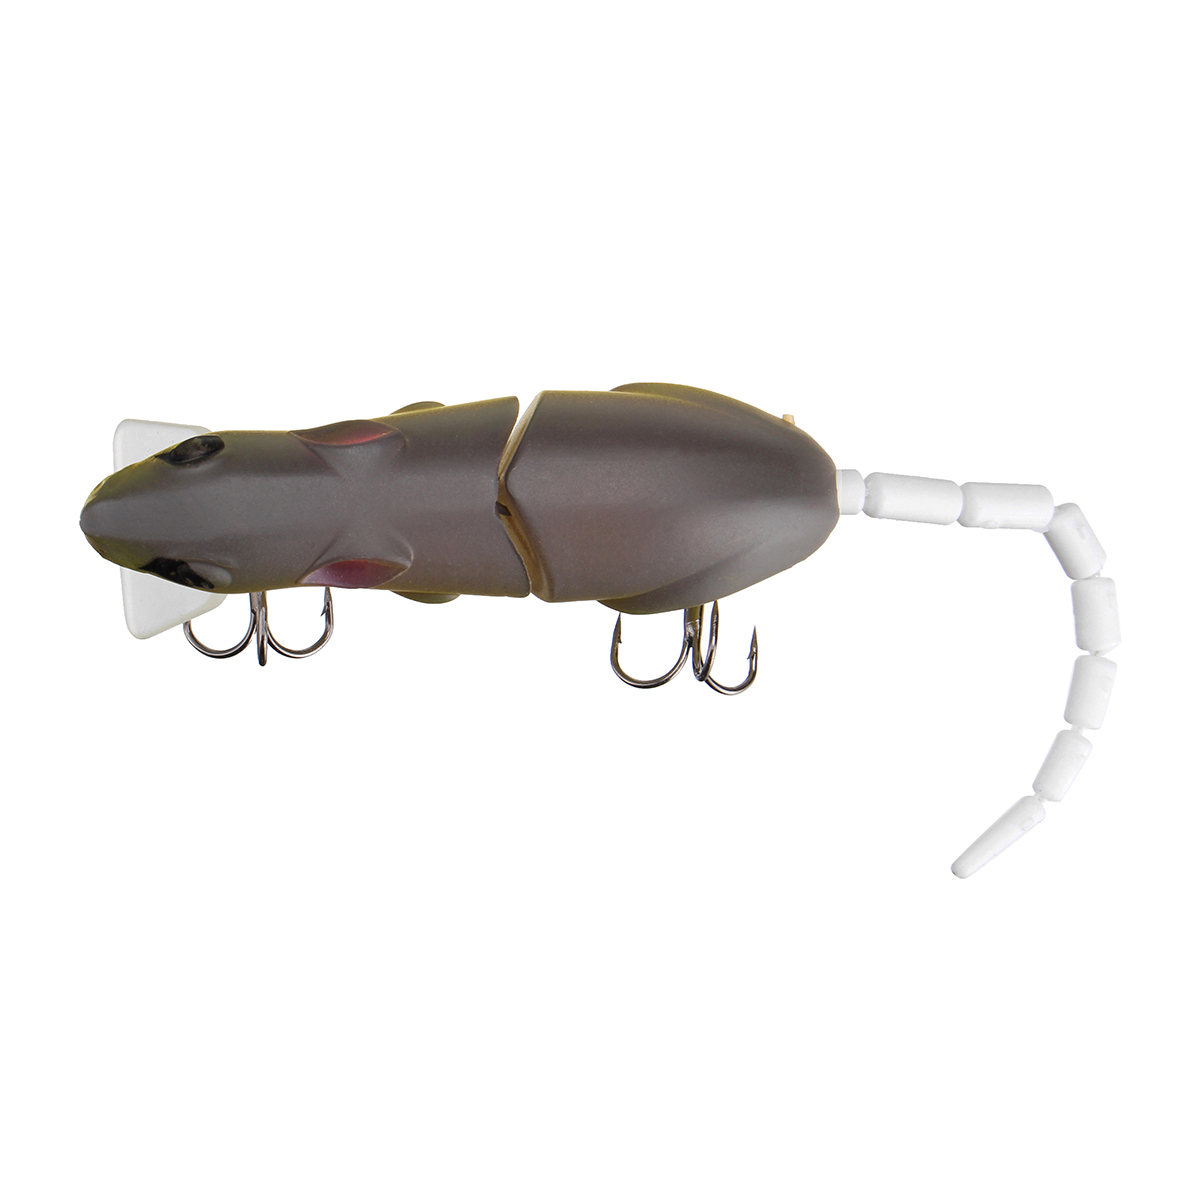 25cm-155g-Jointed-Rat-Fishing-Lure-Mouse-Floating-Crankbait-Sea-Topwater-3D-Eyes-Artificial-Baits-1354966-6